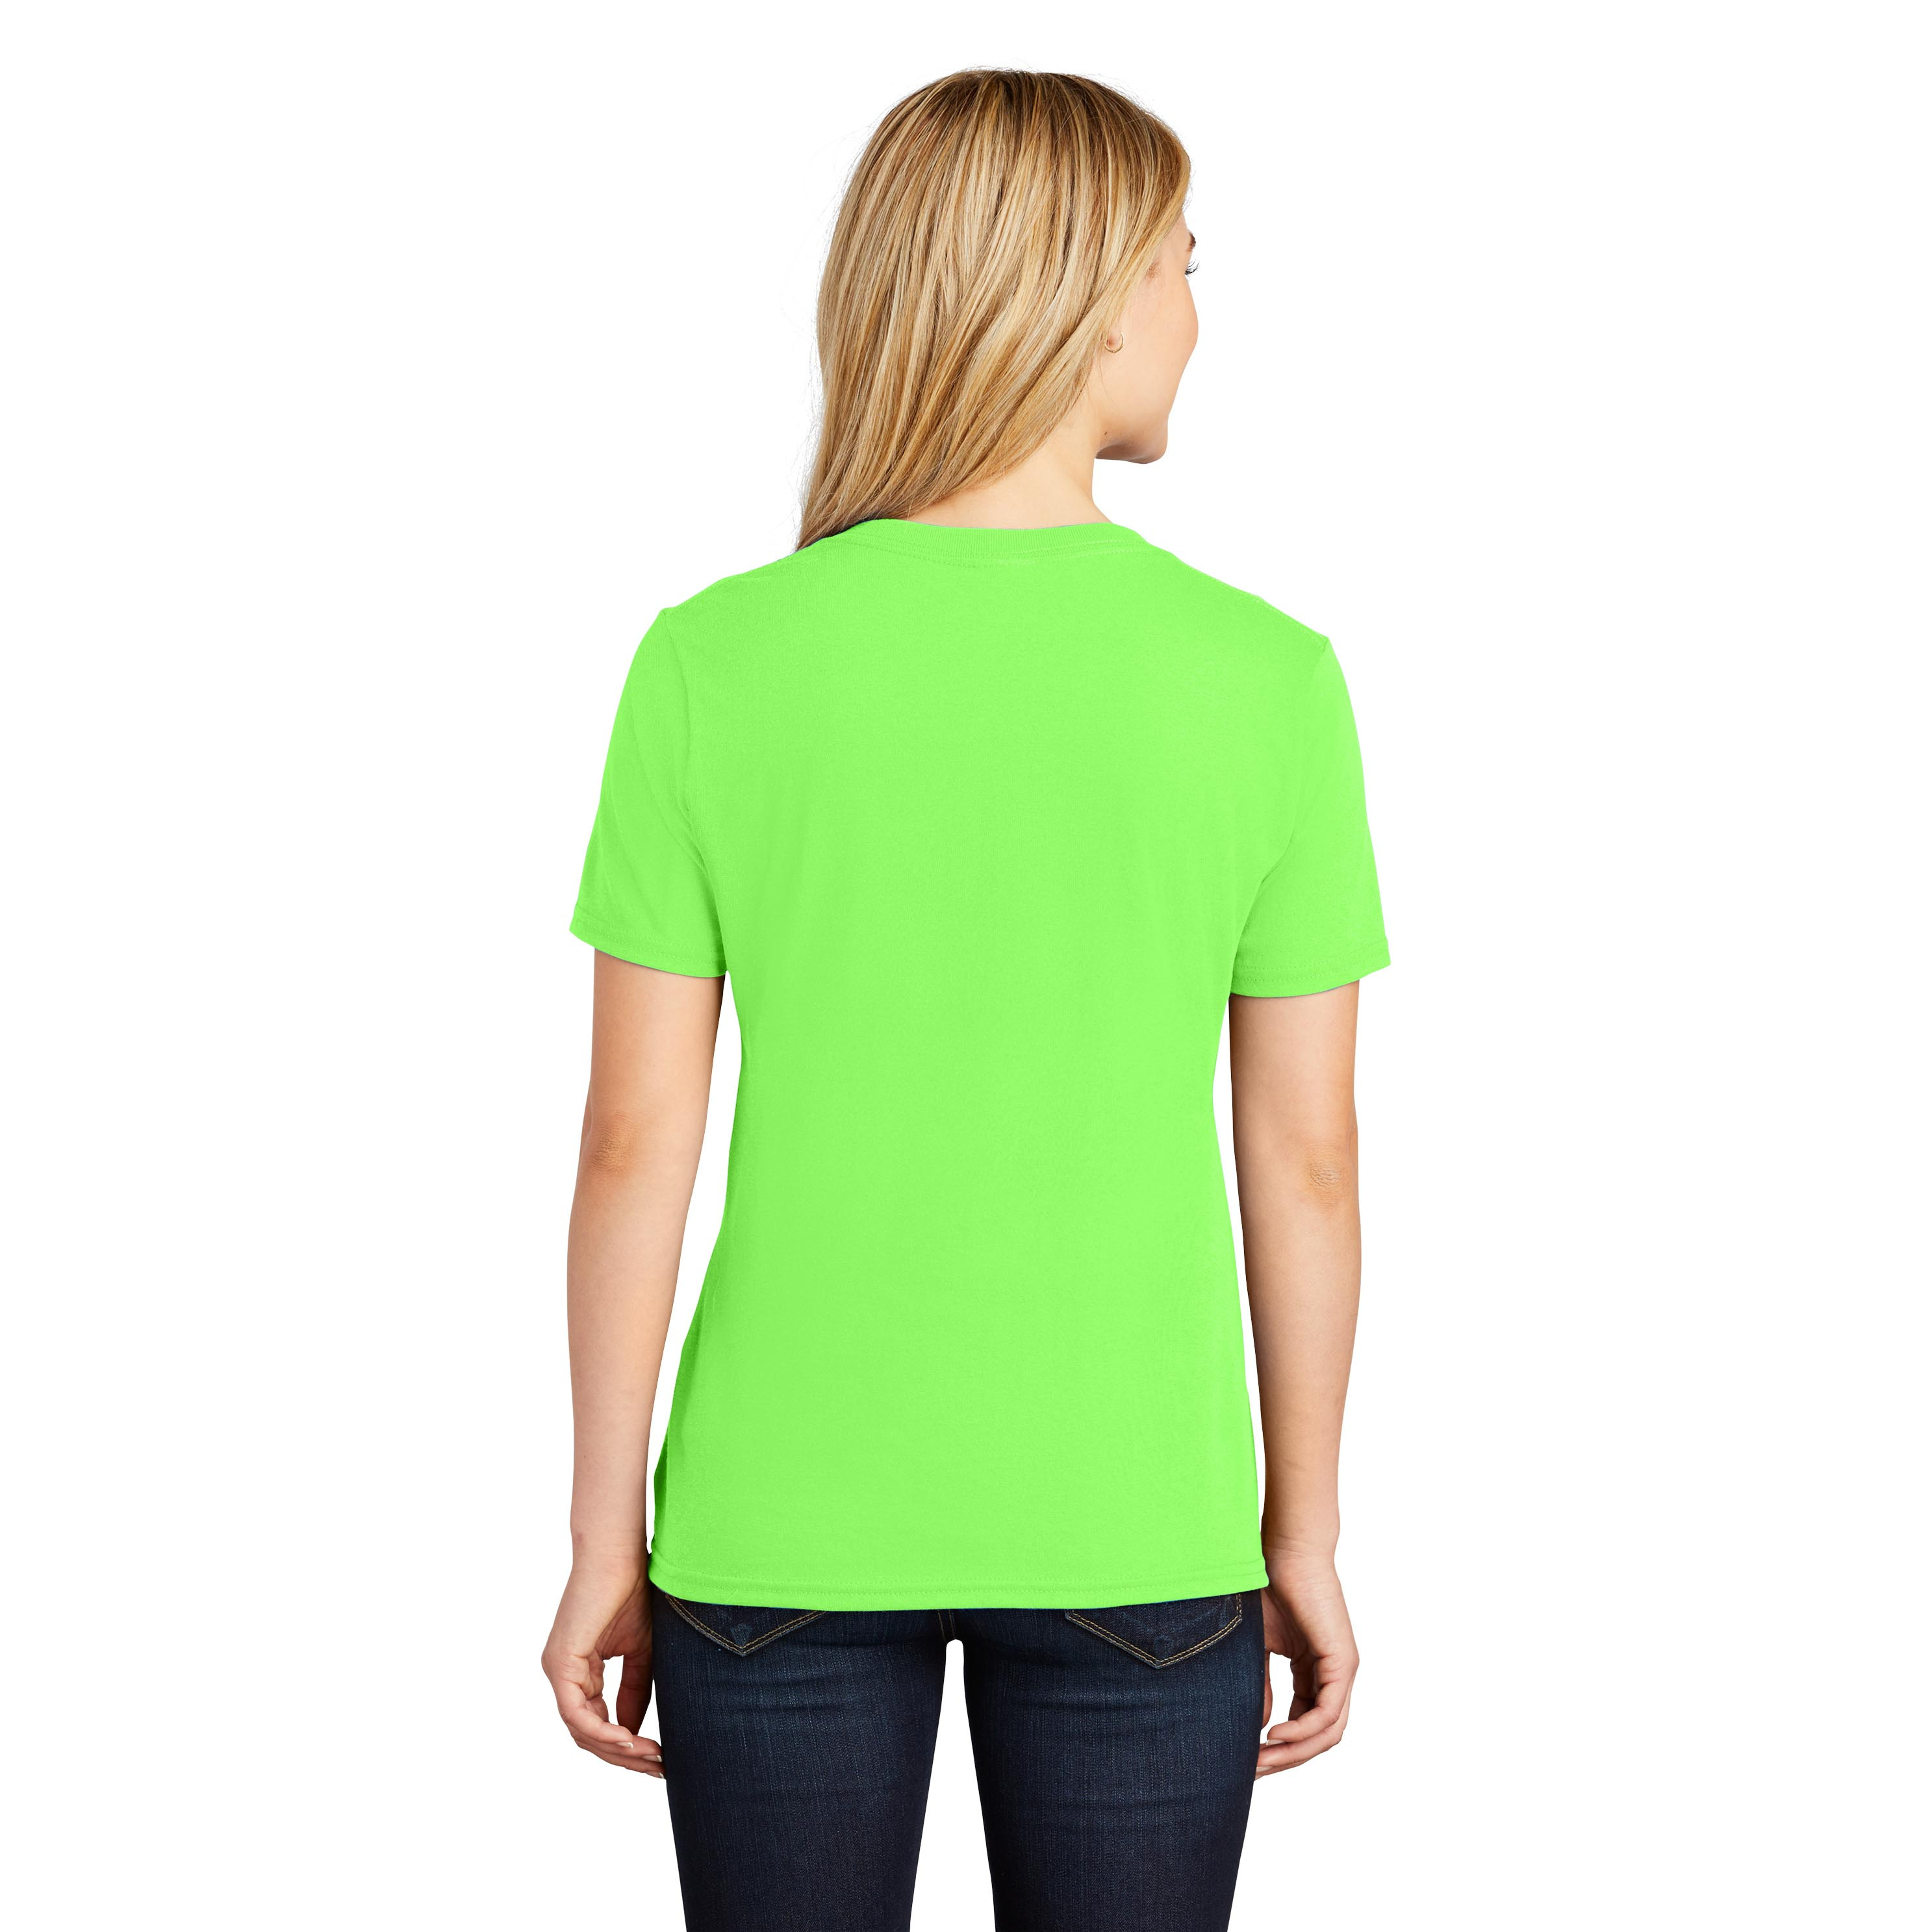 Pure Cotton Neon Green Color Printed T-shirt For Girls And Women's –